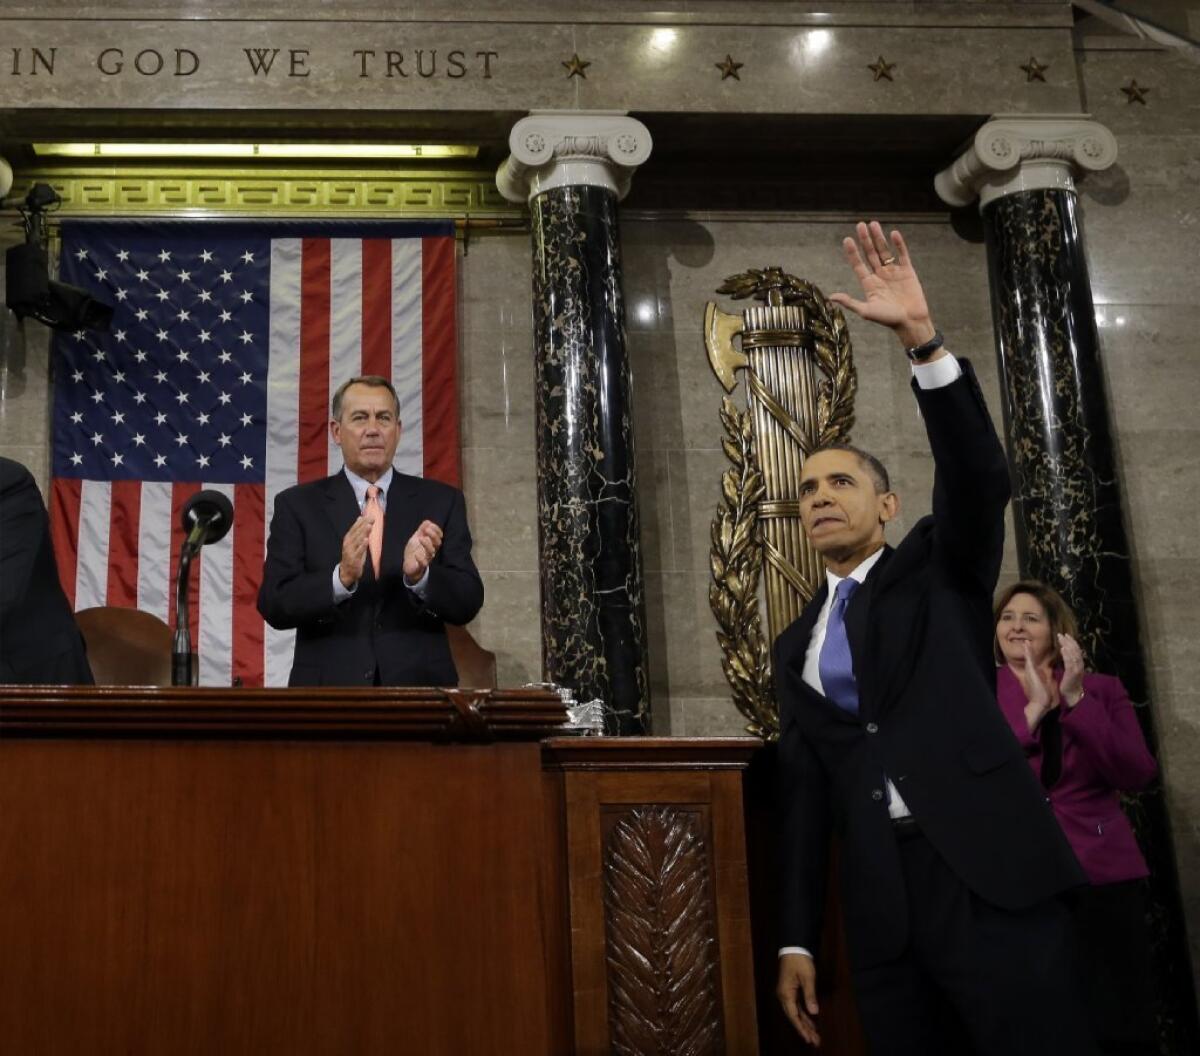 President Obama waves after his 2013 State of the Union address.